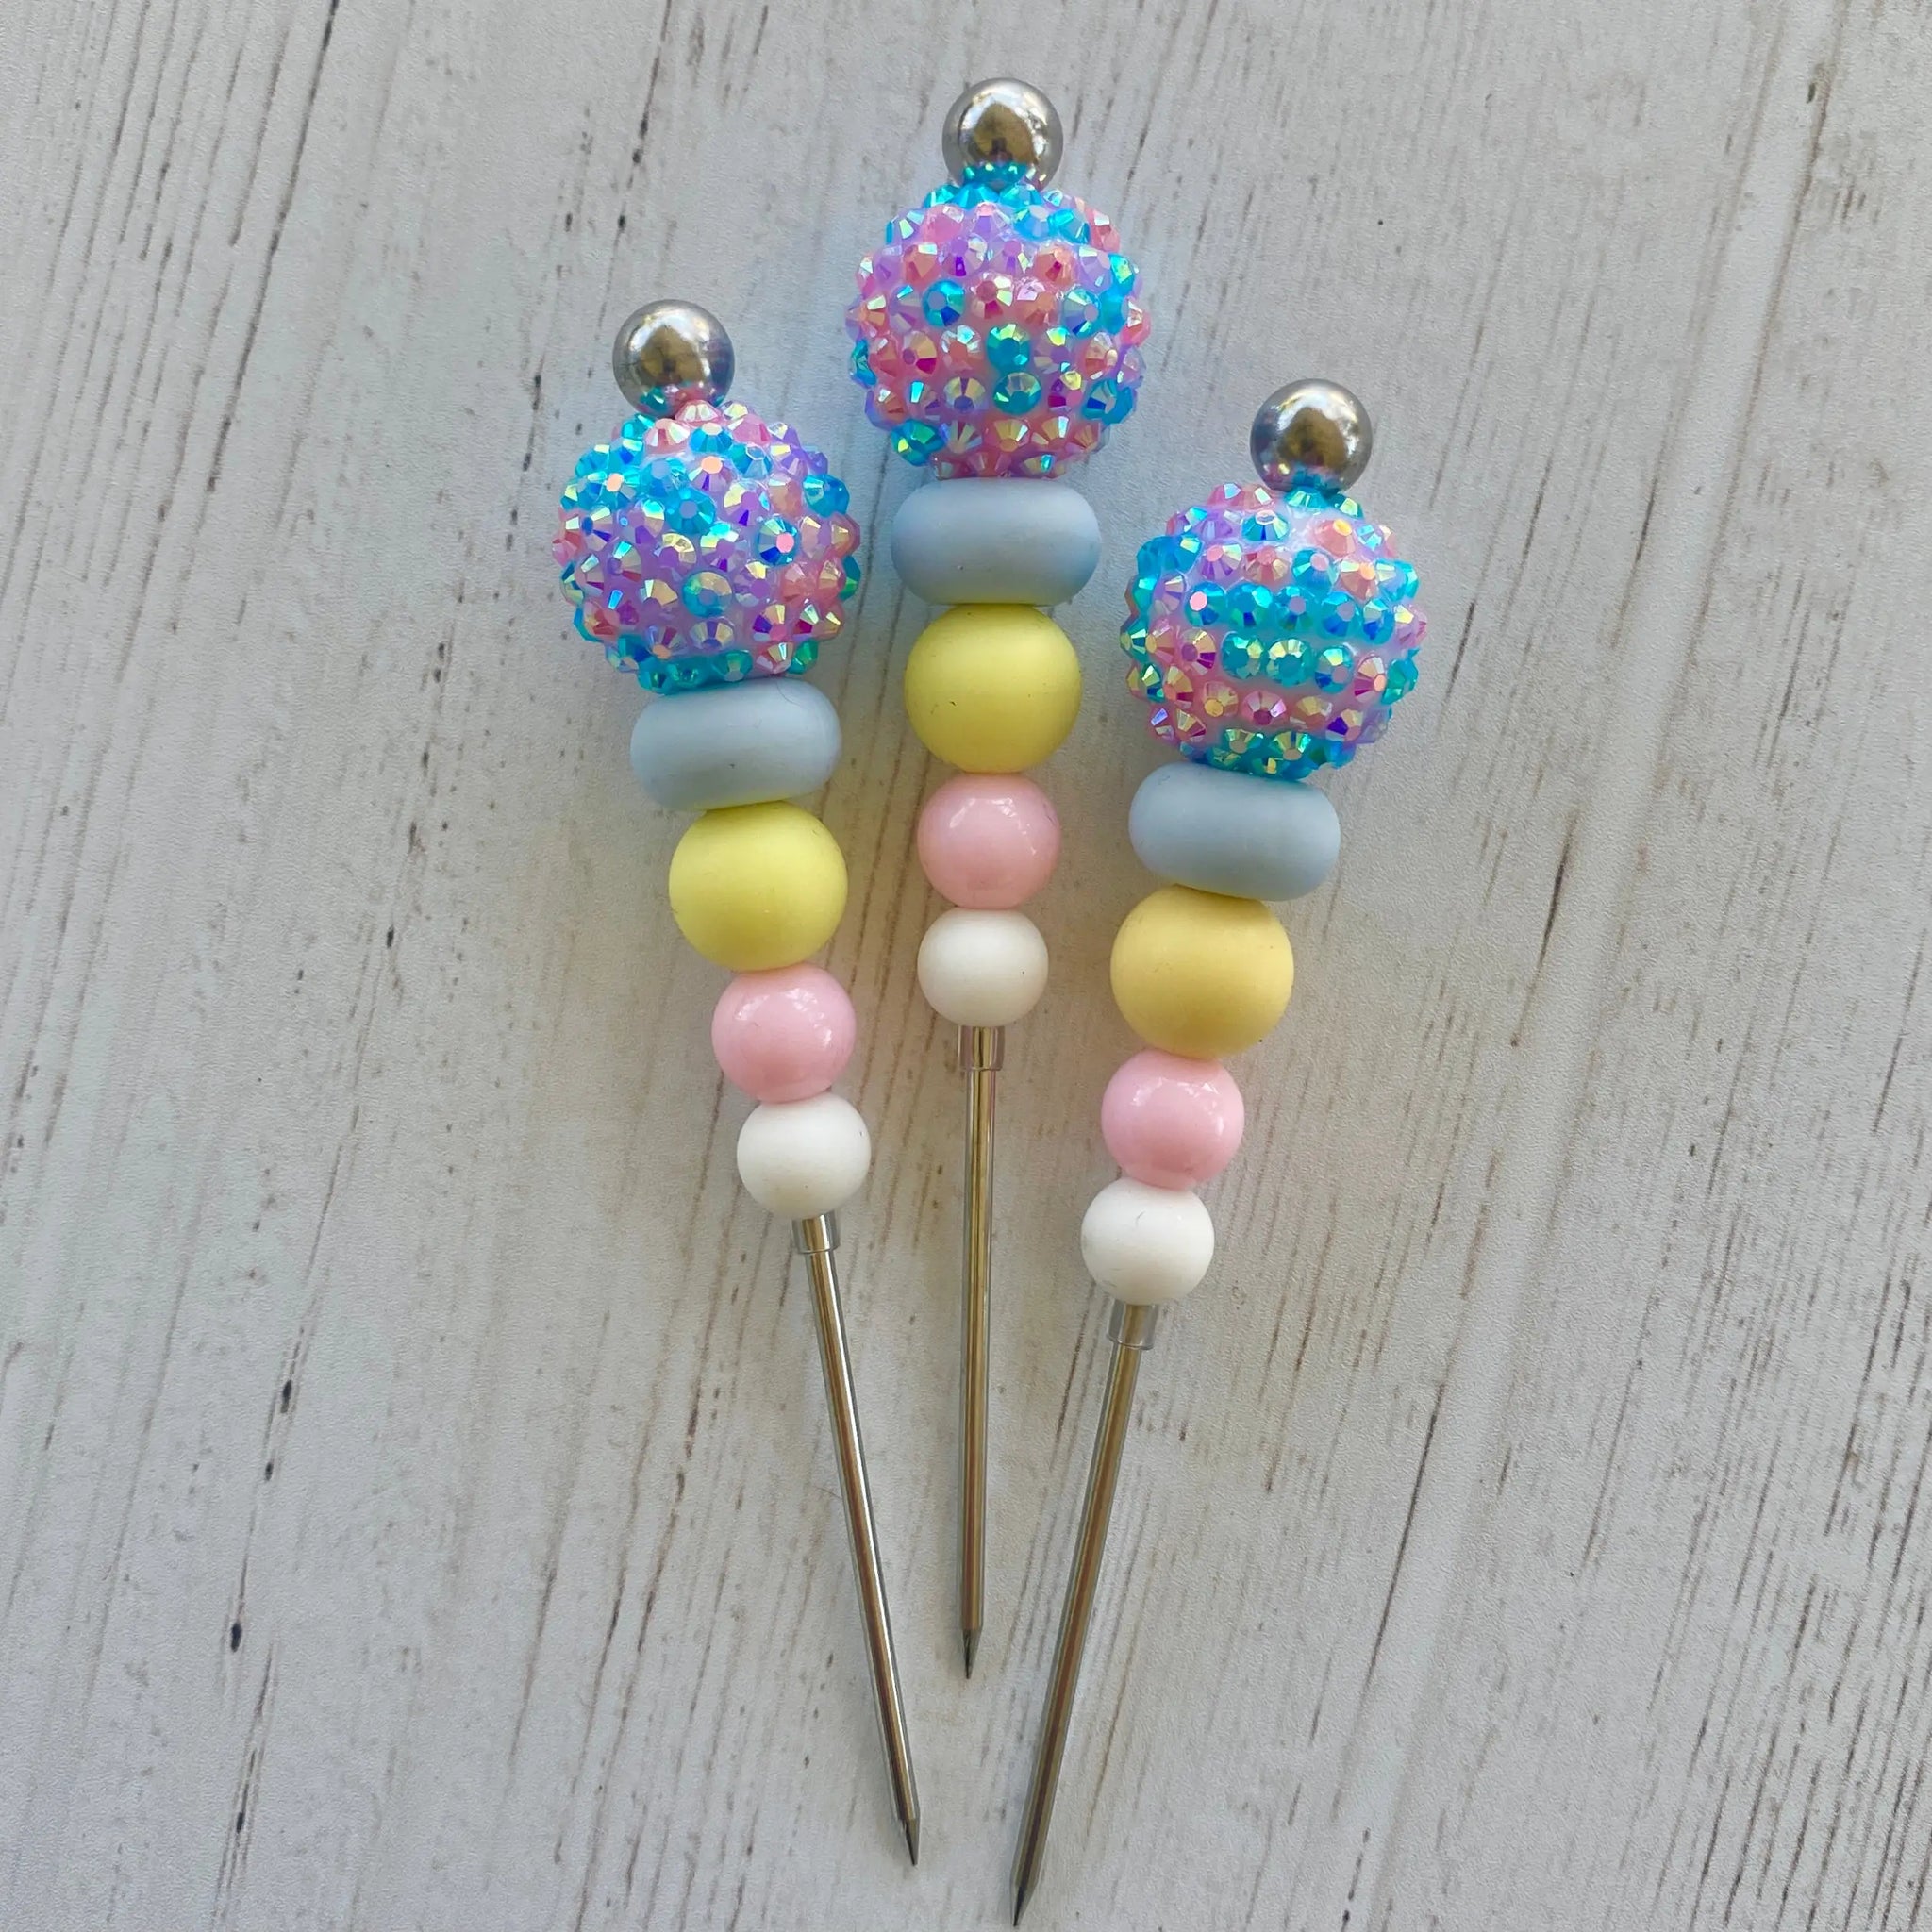 Beadable Cookie Scribes, Cookie Scribe Tool, Cookie Scribe for